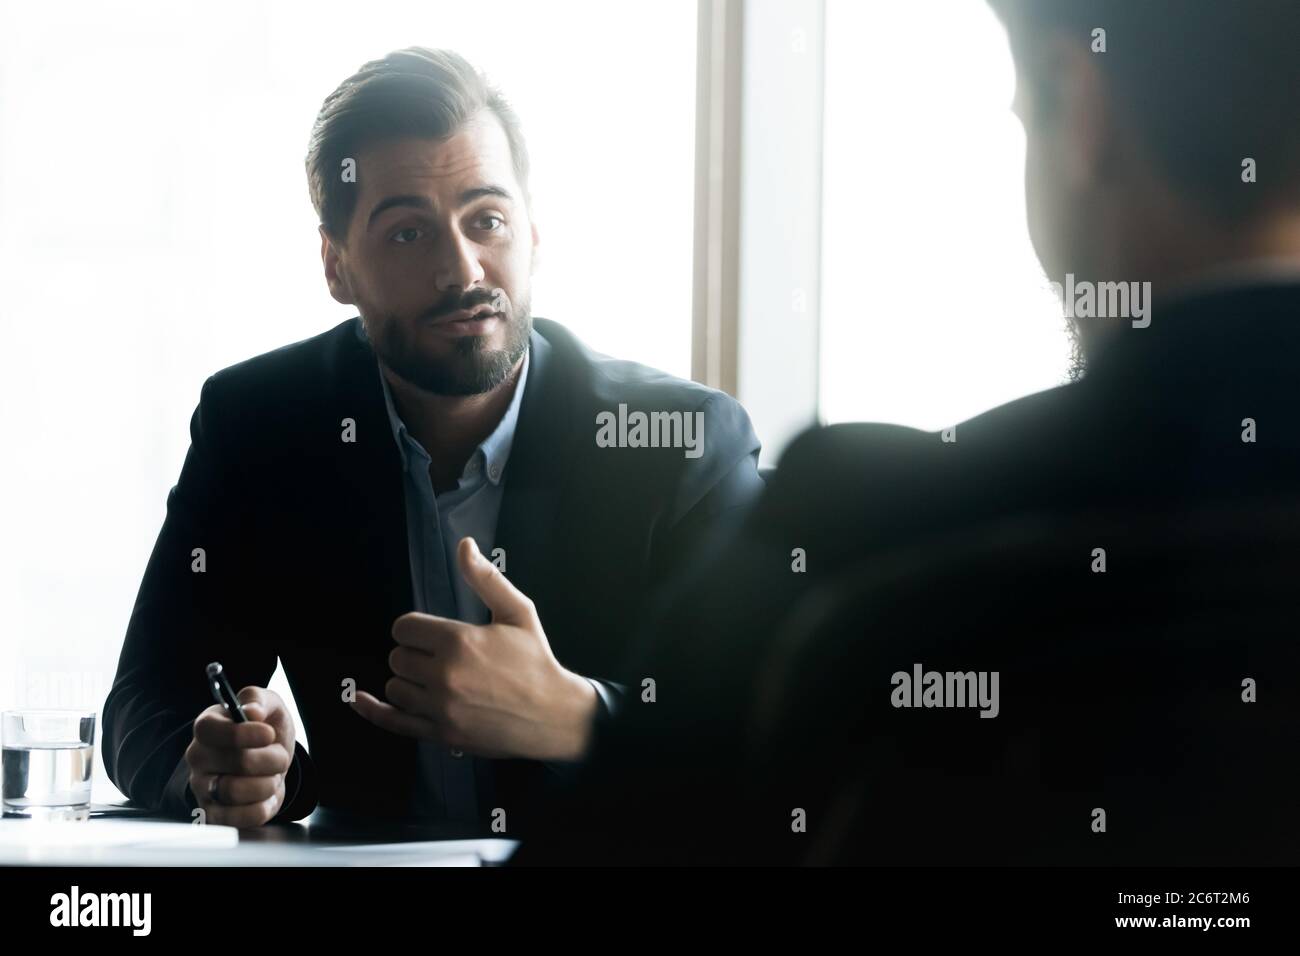 30s businessman discussing collaboration with male partner. Stock Photo